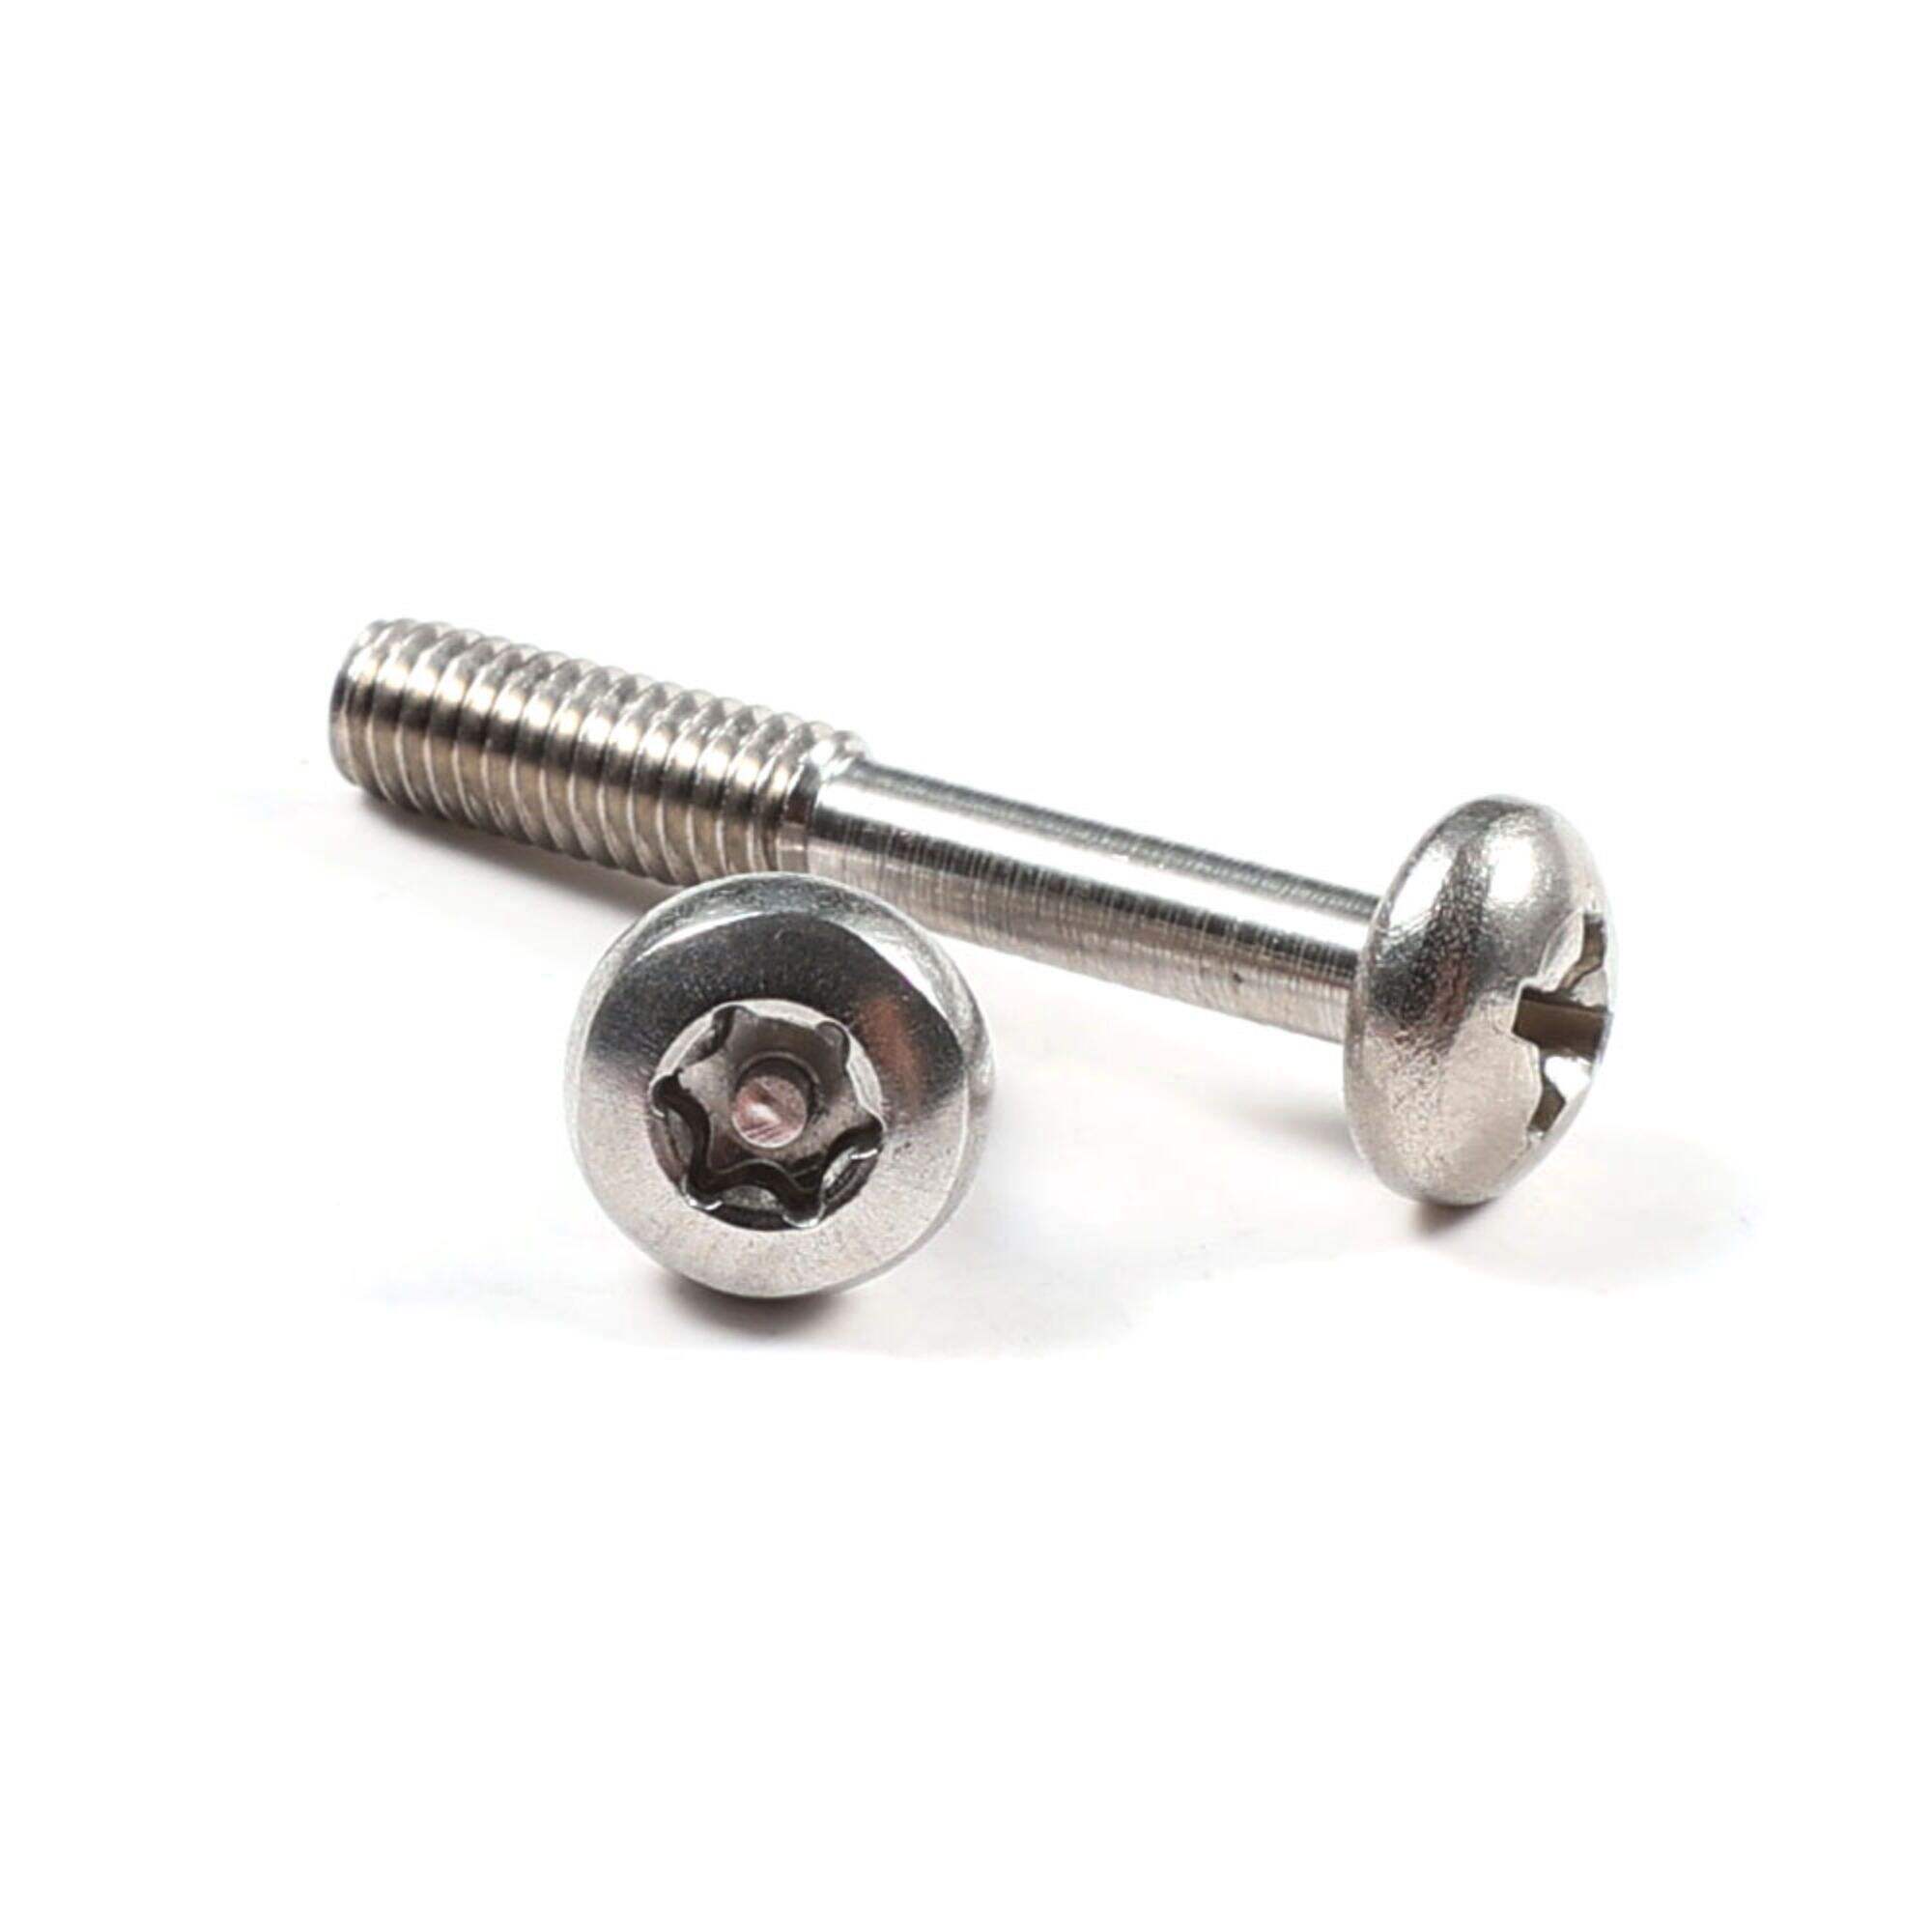 Torx Tampered Resistant Screw T25 Torx Screw With Pin Security Bolt Anti Theft Bolt